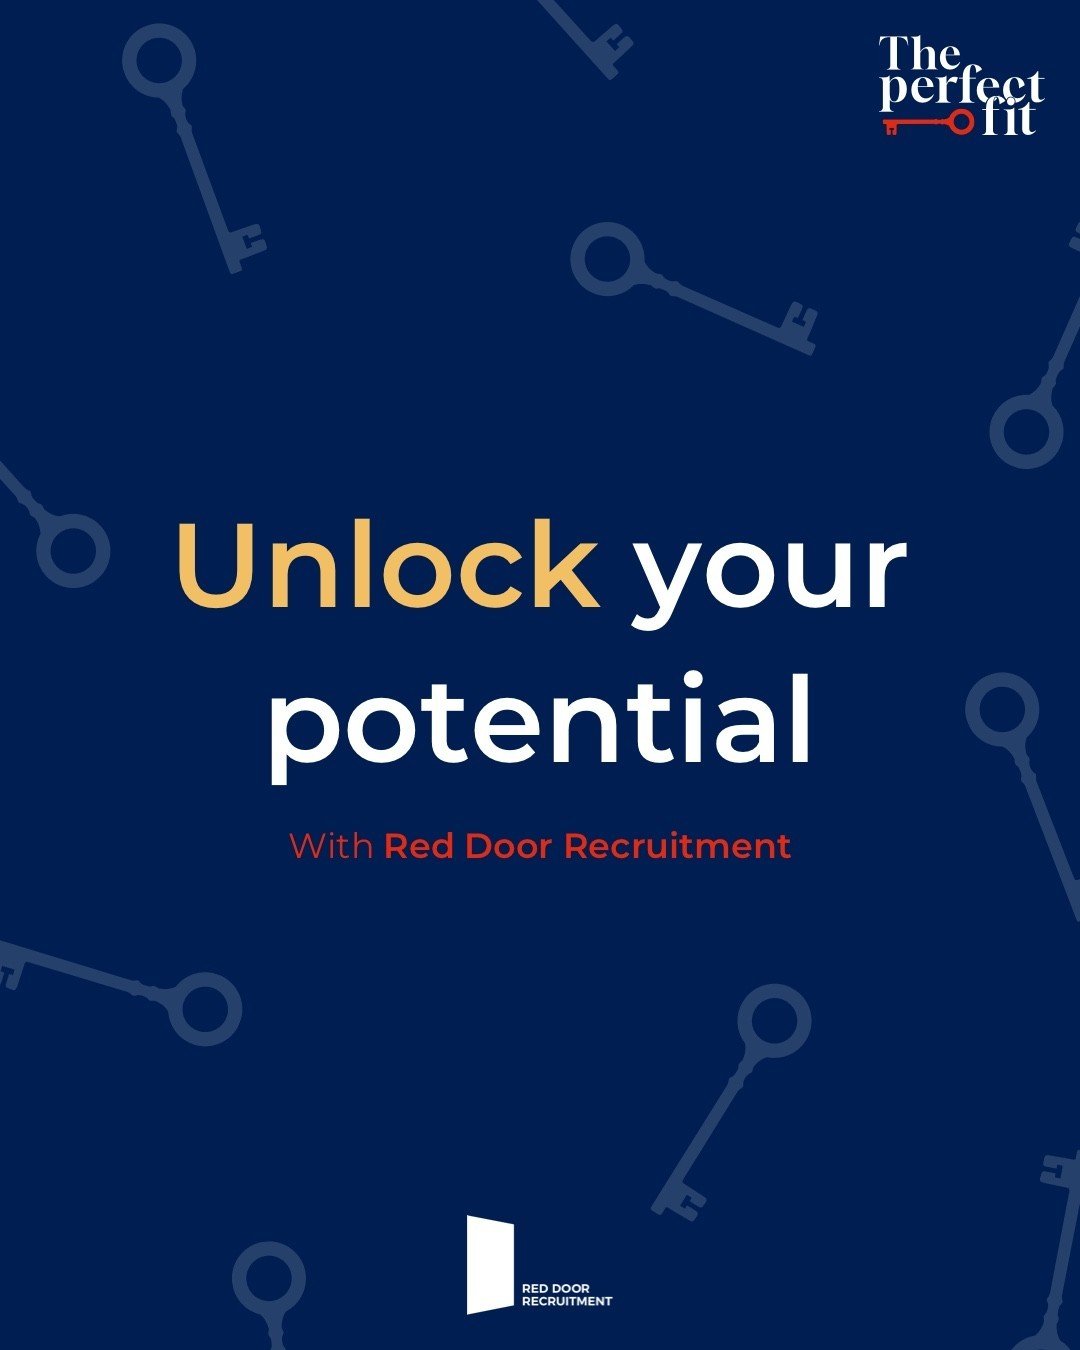 Unlock your potential today with Red Door and our latest roles! Swipe to find your perfect fit now! 👉🏻⁠
⁠
#stalbans #hertfordshire #perfectfit #careergoals #wearehiring #localbusiness #newjob #unlockyourpotential